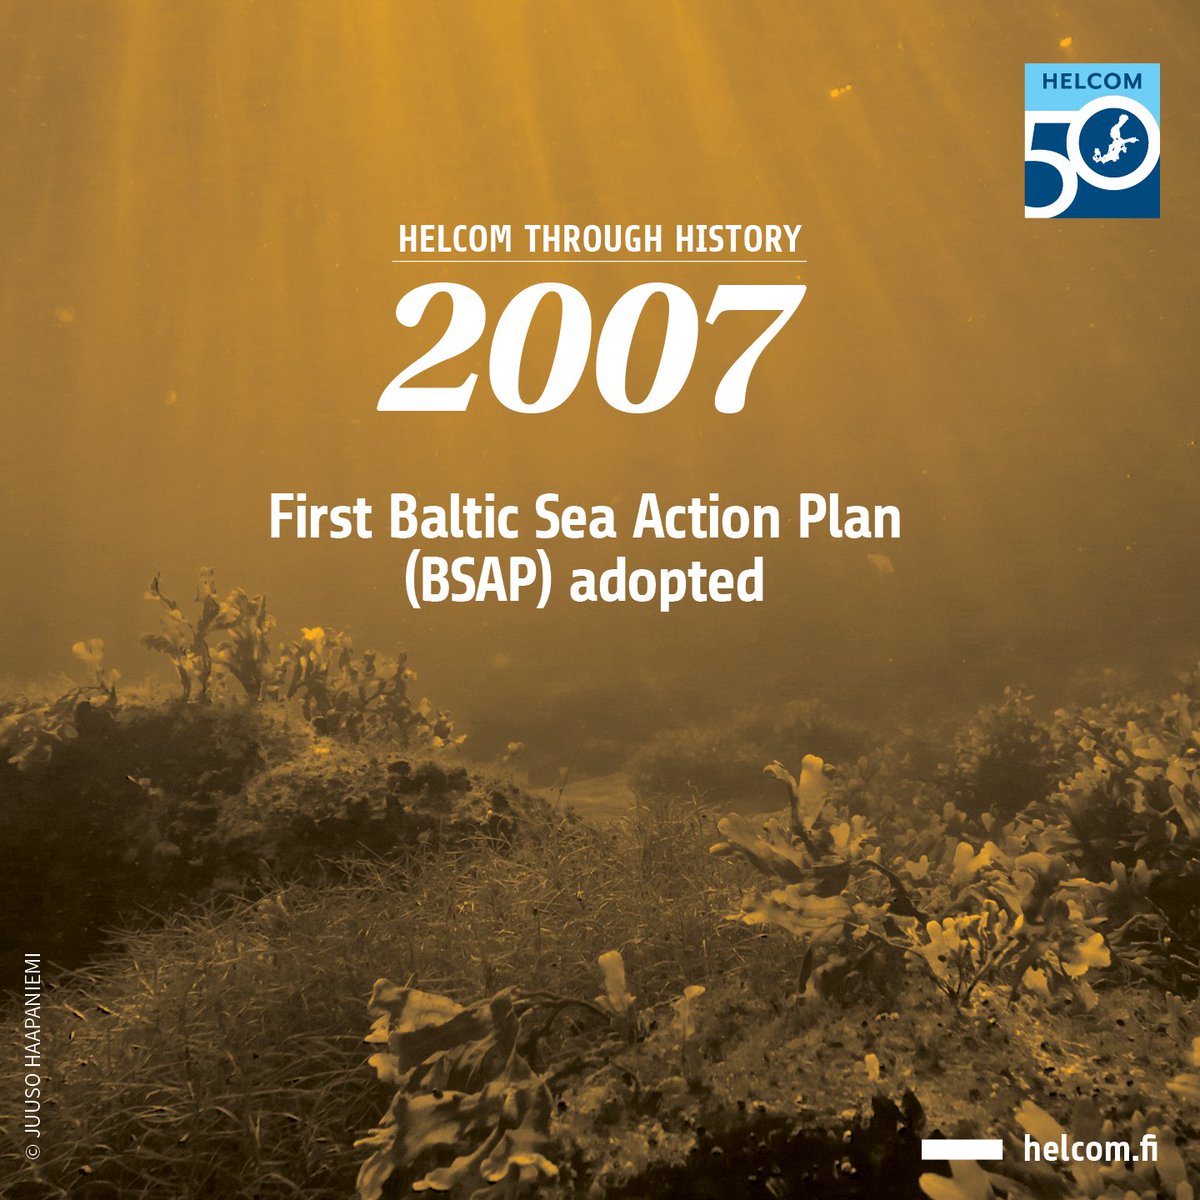 🕰️It’s HELCOM Through History time! 🕰️ The Baltic Sea Action Plan, first adopted in 2007, is HELCOM’s strategic programme of measures and actions for achieving good environmental status of the sea, ultimately leading to a Baltic Sea in a healthy state 🌱 #HELCOMThroughHistory